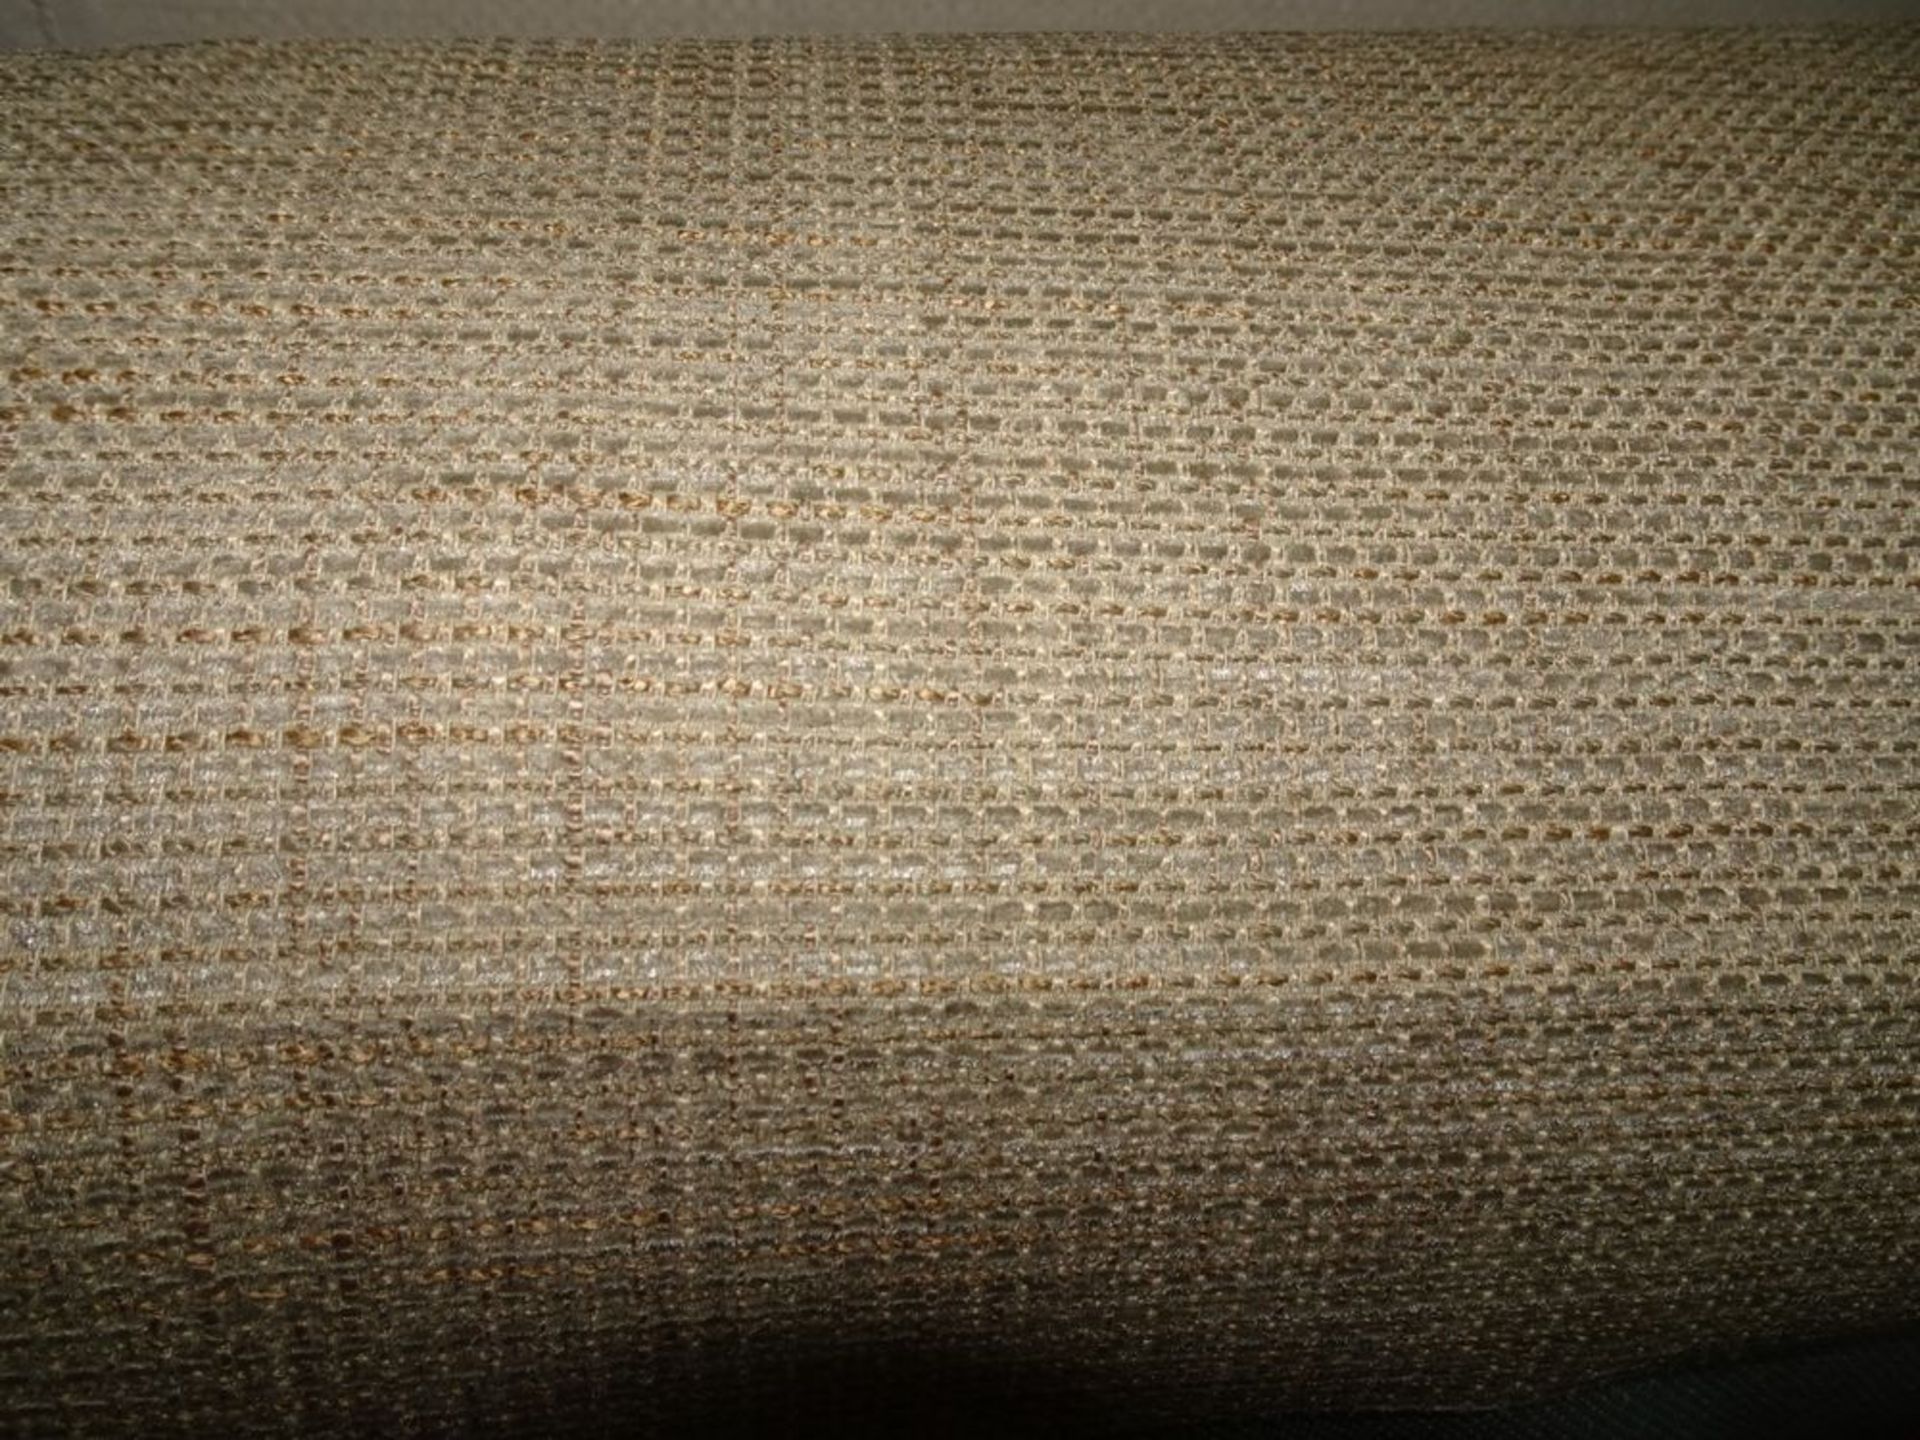 ROLL OF UPHOLSTERY FABRIC - LINEN - (APPROX 48.5 YDS) - Image 3 of 3